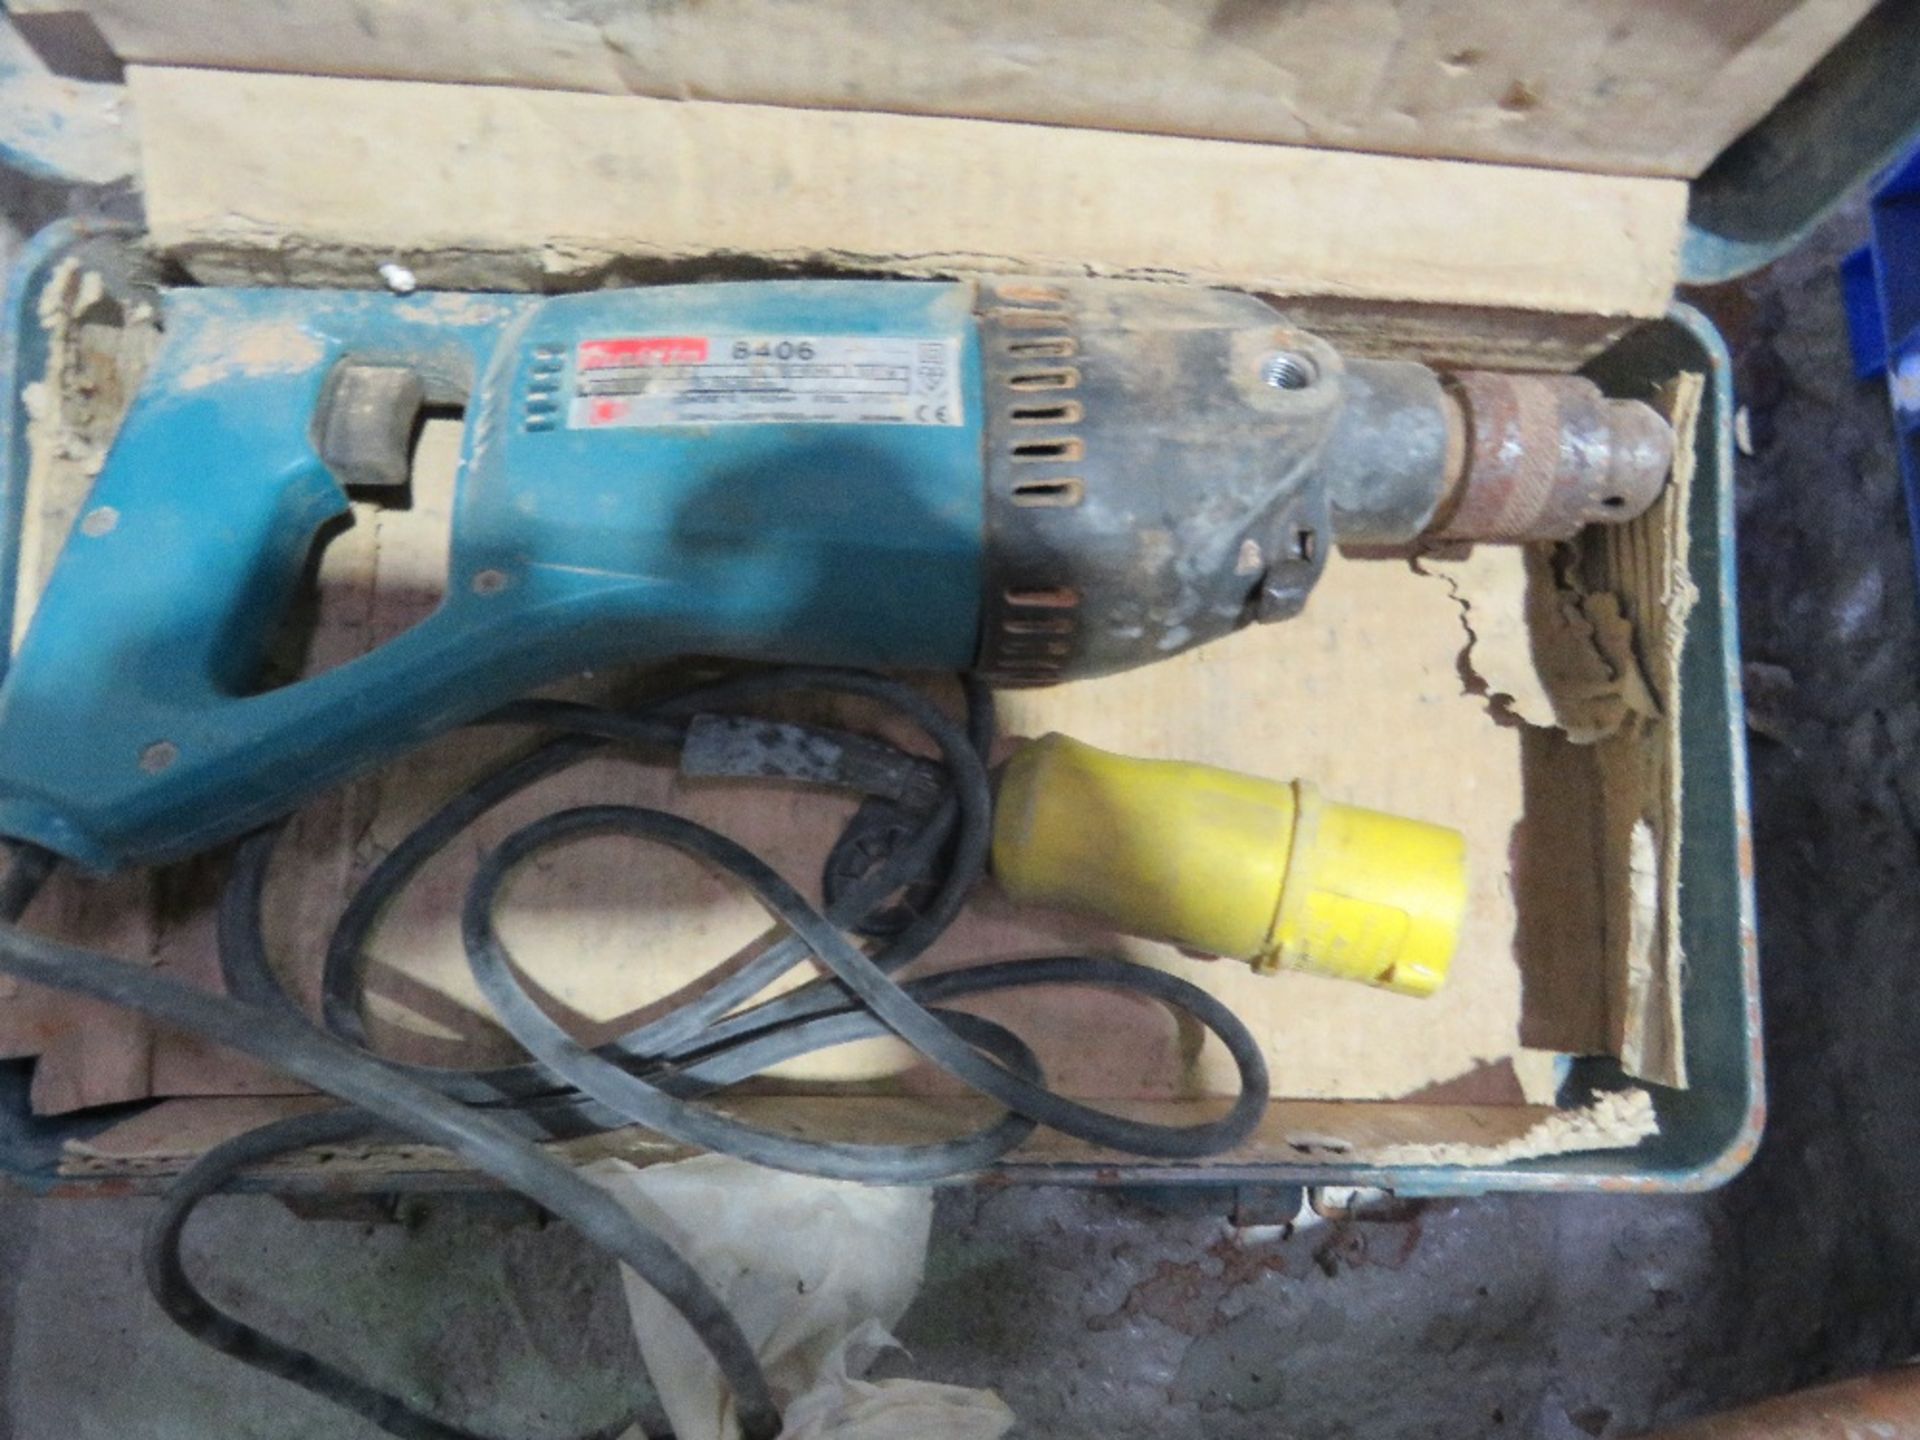 2 X 110VOLT POWERED DRILLS. THIS LOT IS SOLD UNDER THE AUCTIONEERS MARGIN SCHEME, THEREFORE NO VA - Image 4 of 4